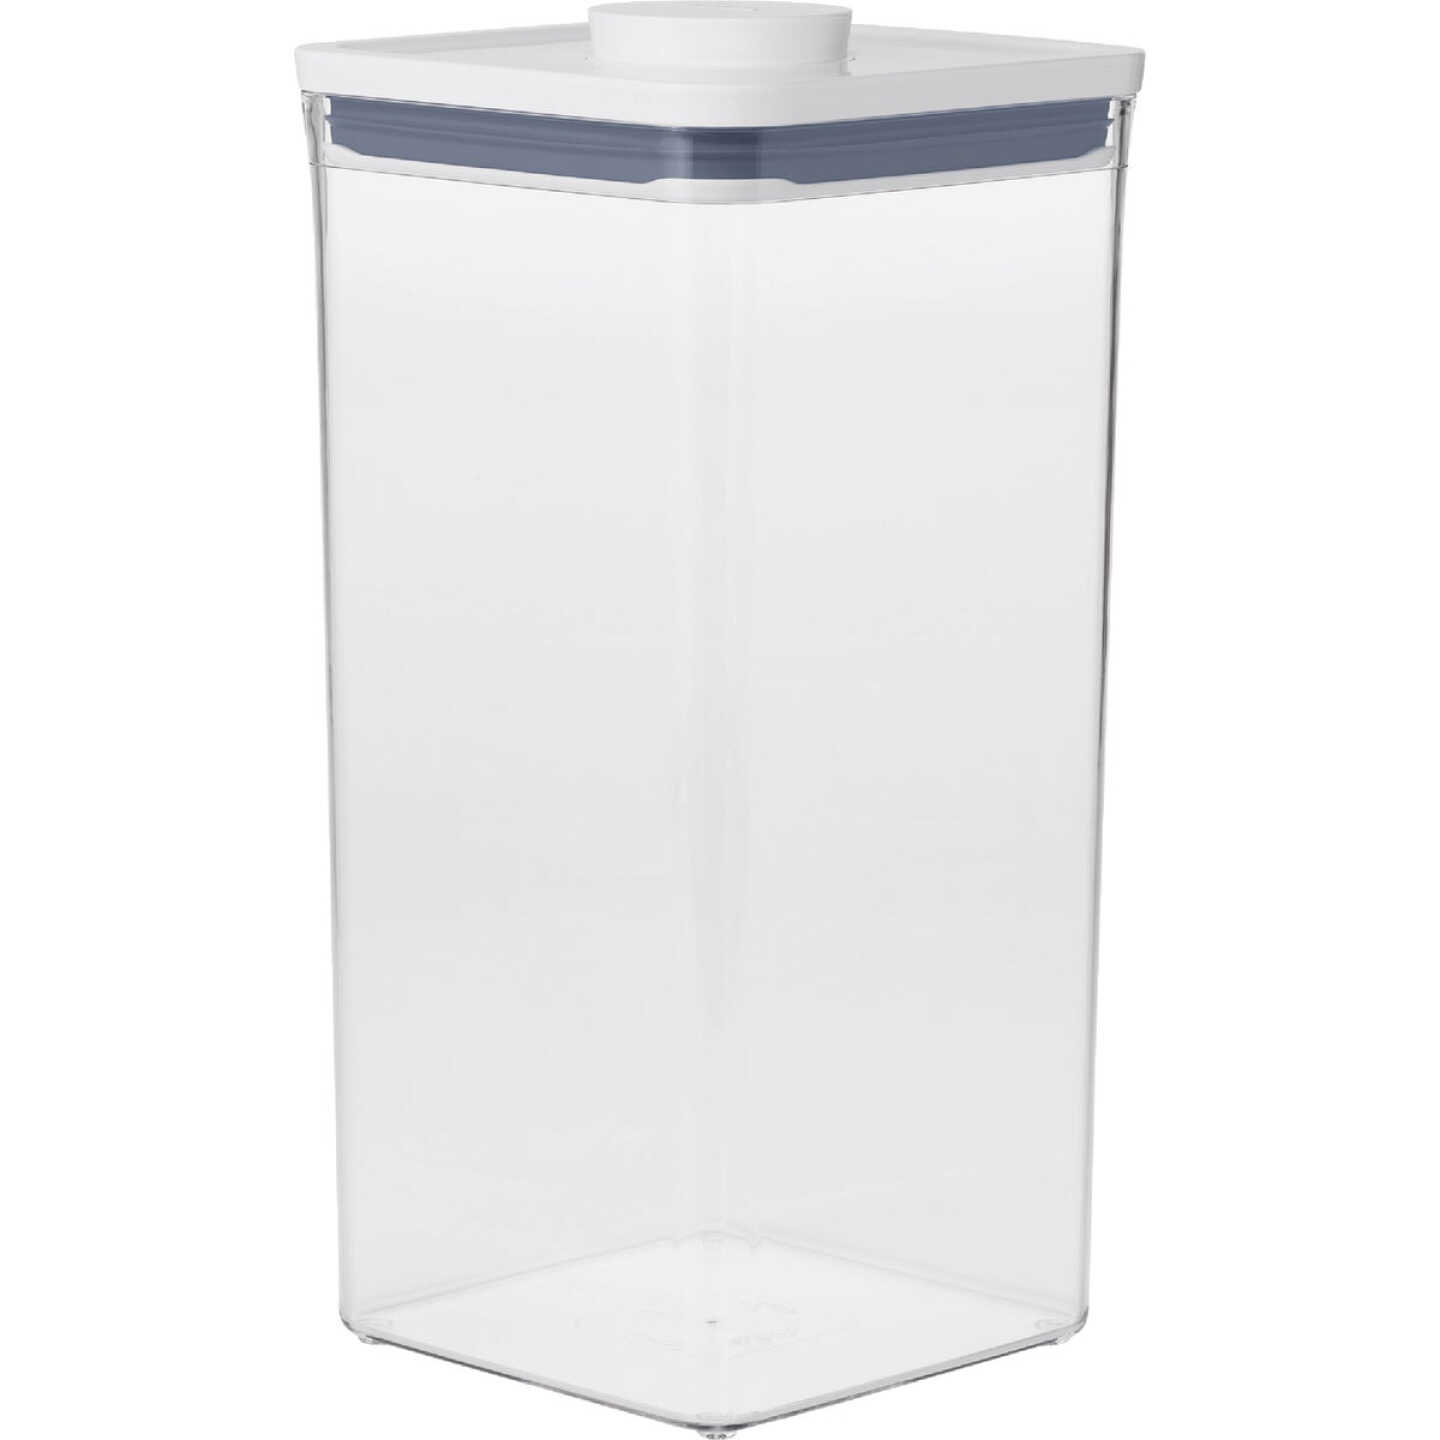 Oxo Good Grips POP Container - Big Square Tall - Power Townsend Company